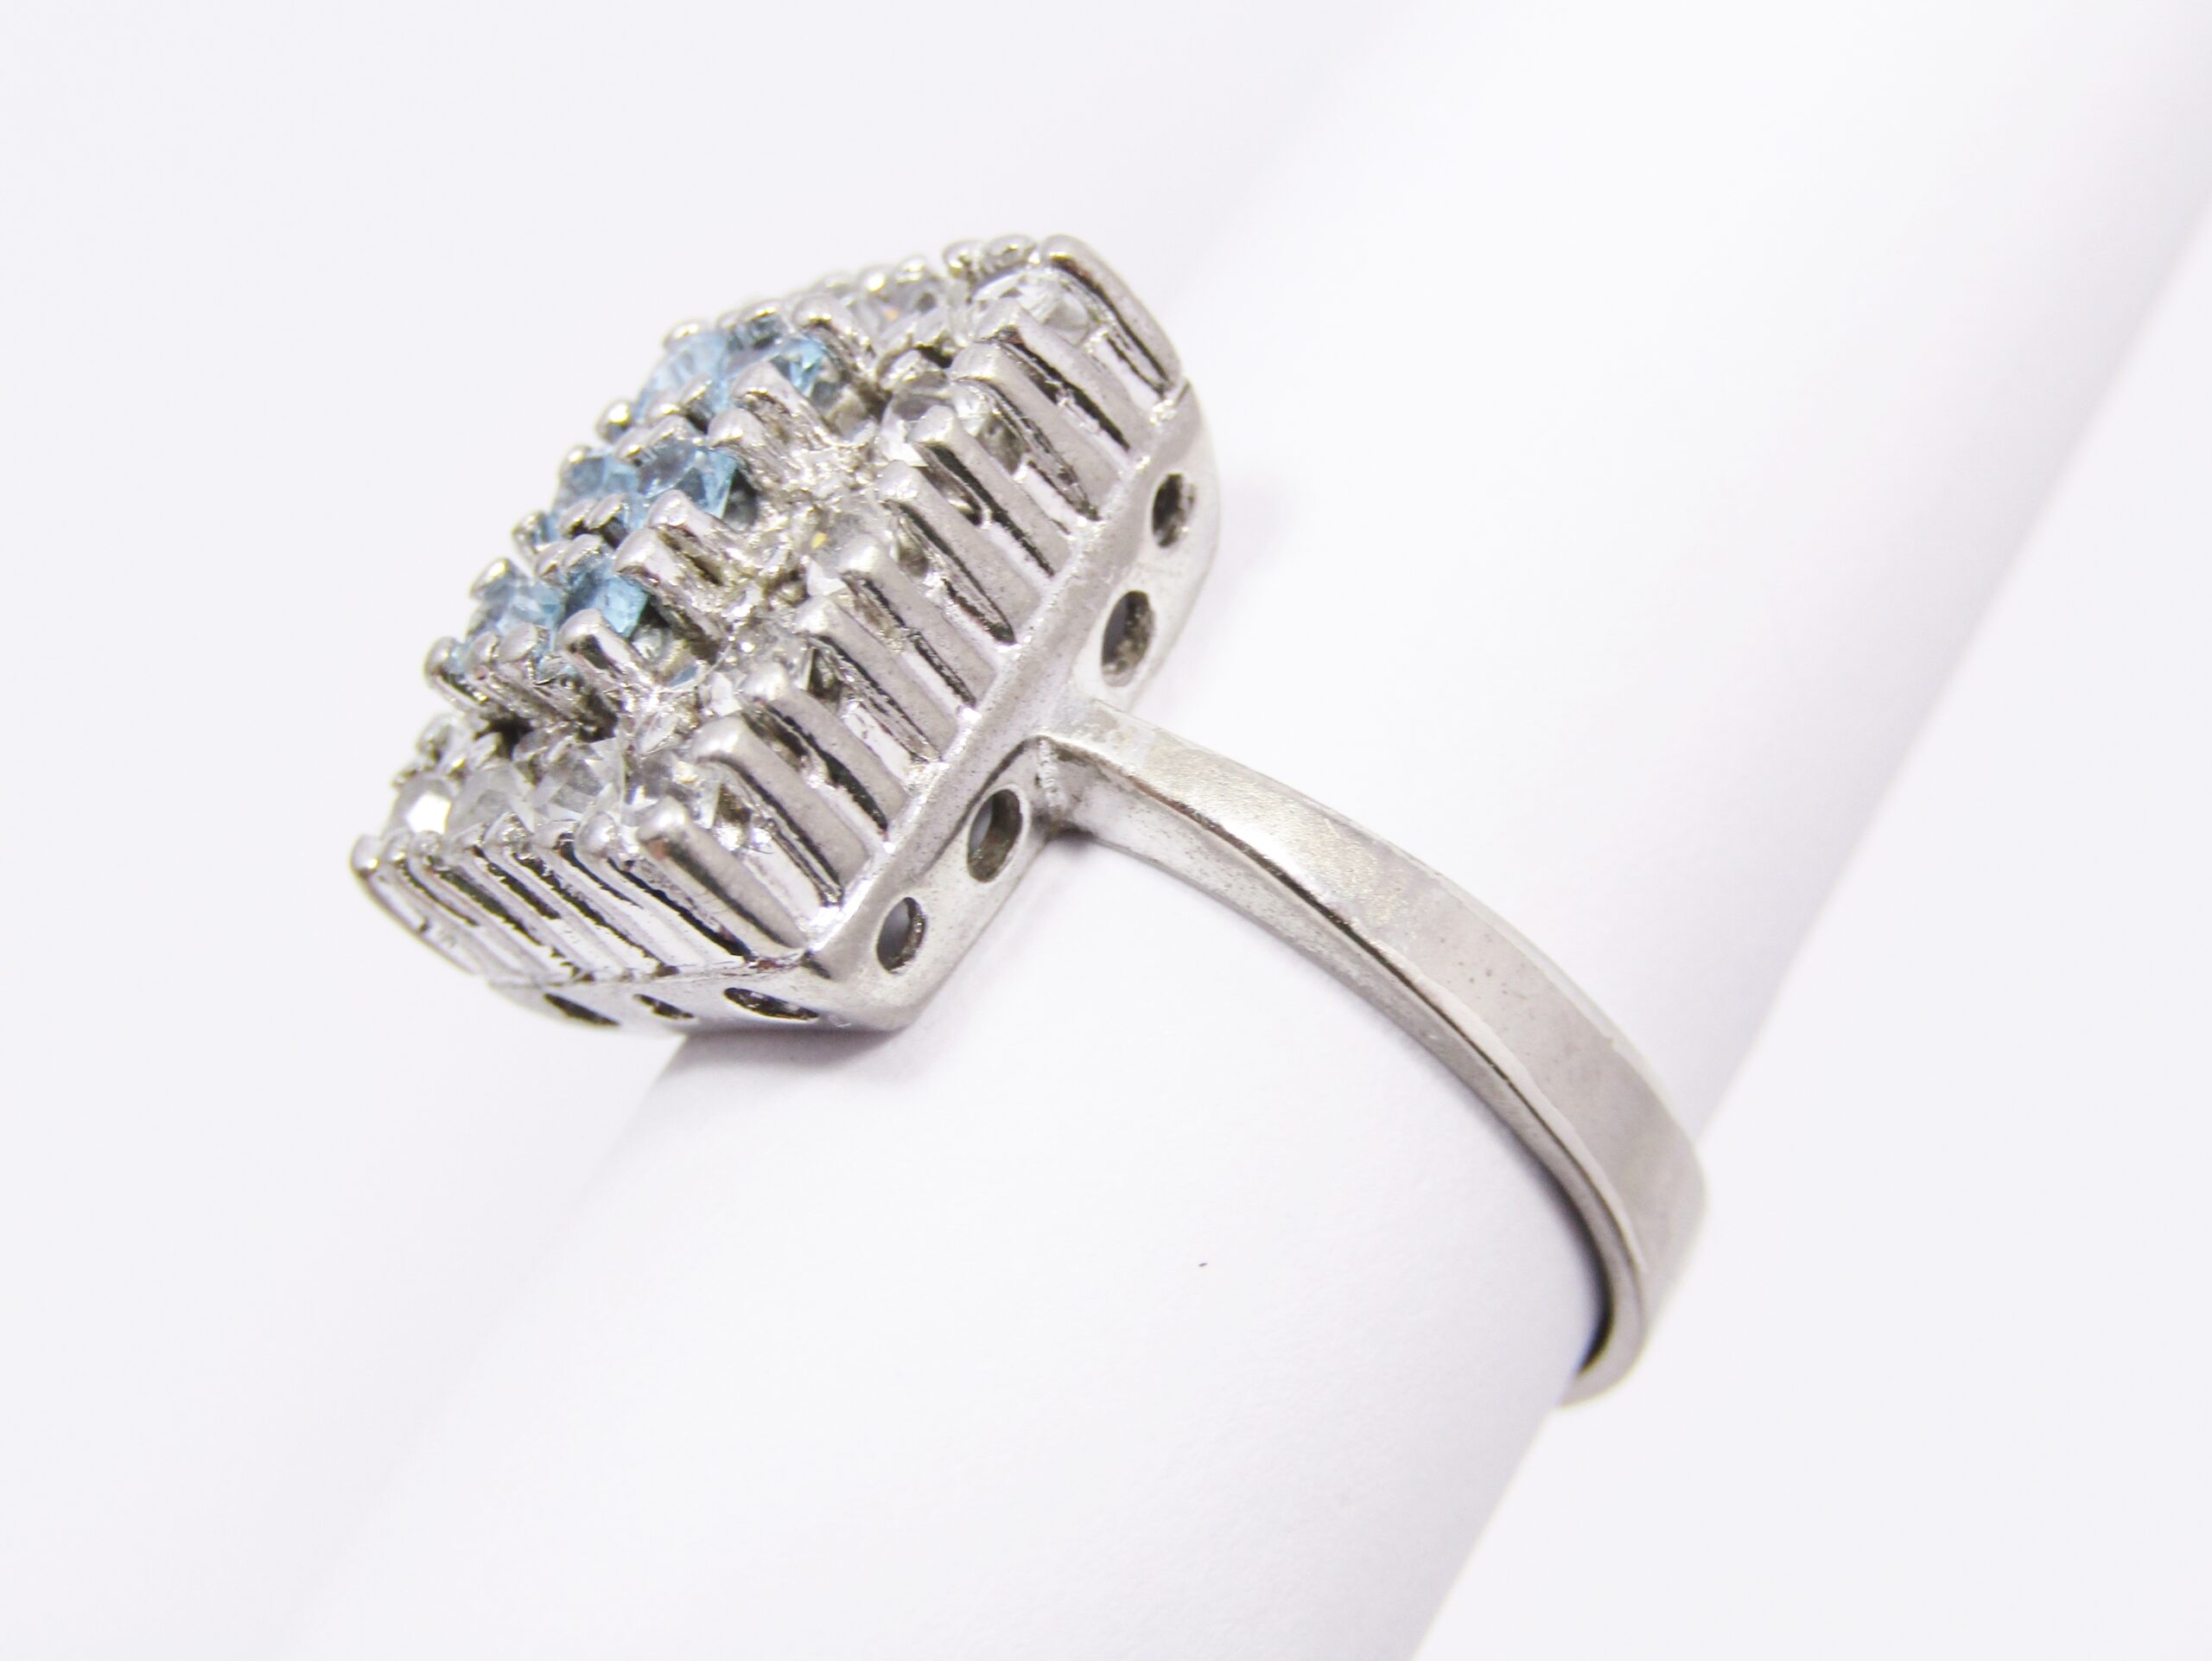 A Beautiful Vintage Design Ring With Blue and Clear Paste Stones in Sterling Silver.